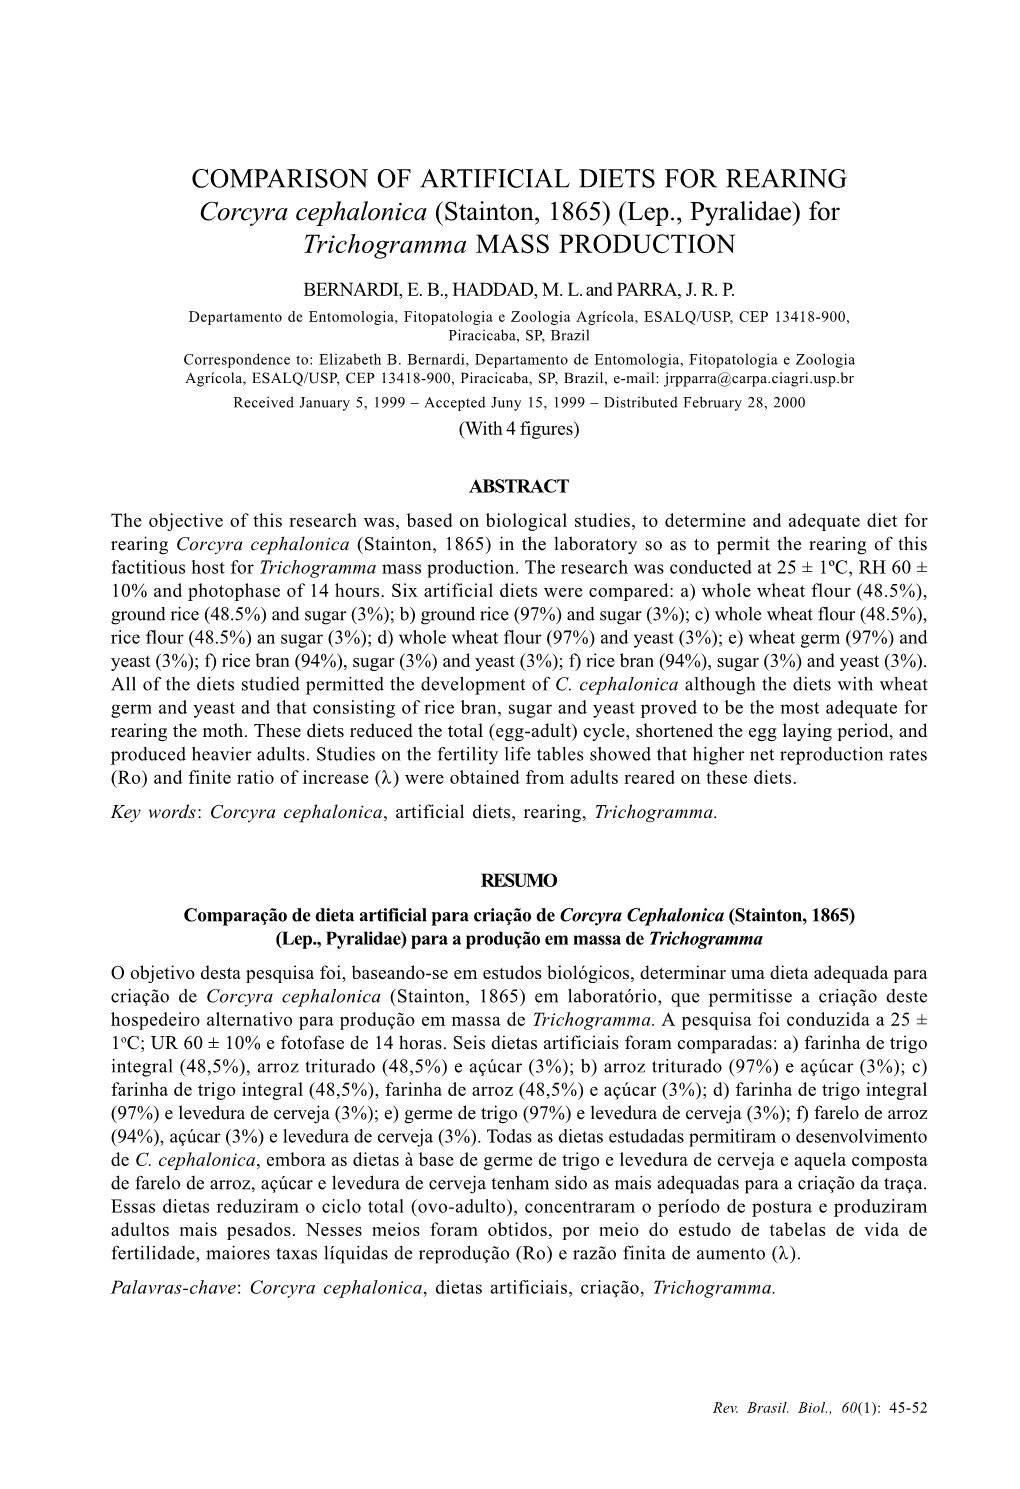 COMPARISON of ARTIFICIAL DIETS for REARING Corcyra Cephalonica (Stainton, 1865) (Lep., Pyralidae) for Trichogramma MASS PRODUCTION